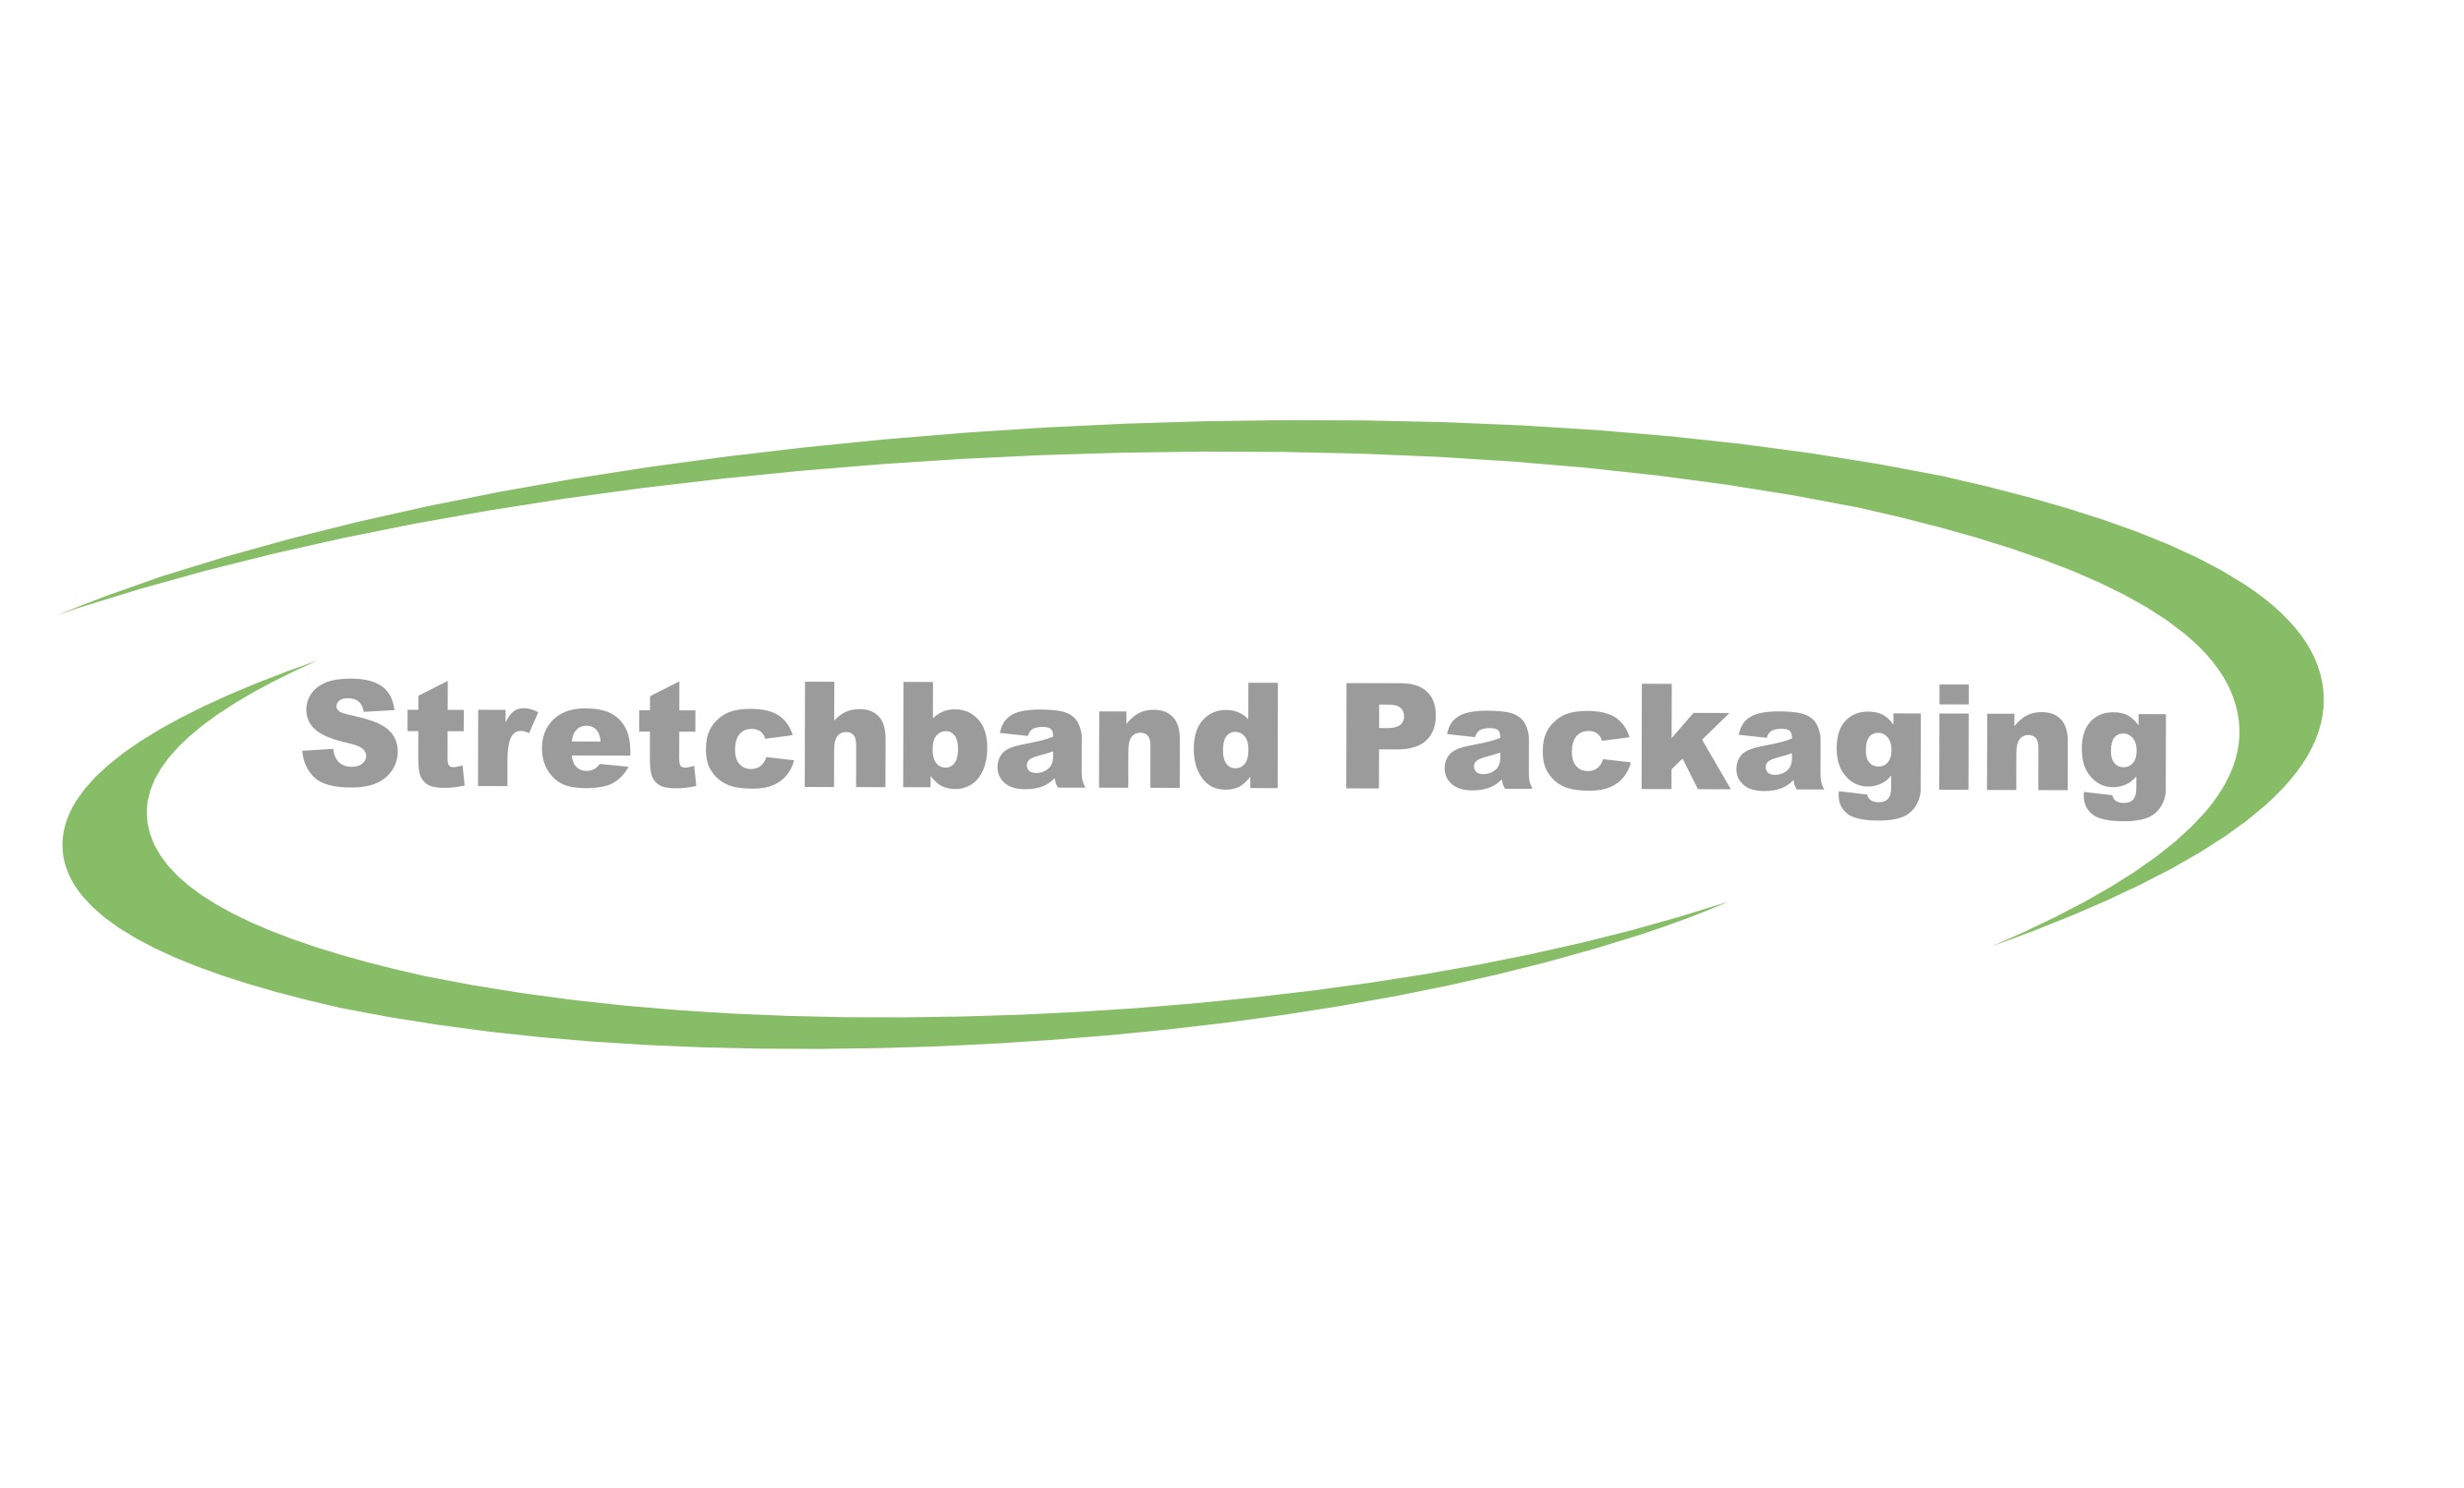 Stretchband Packaging